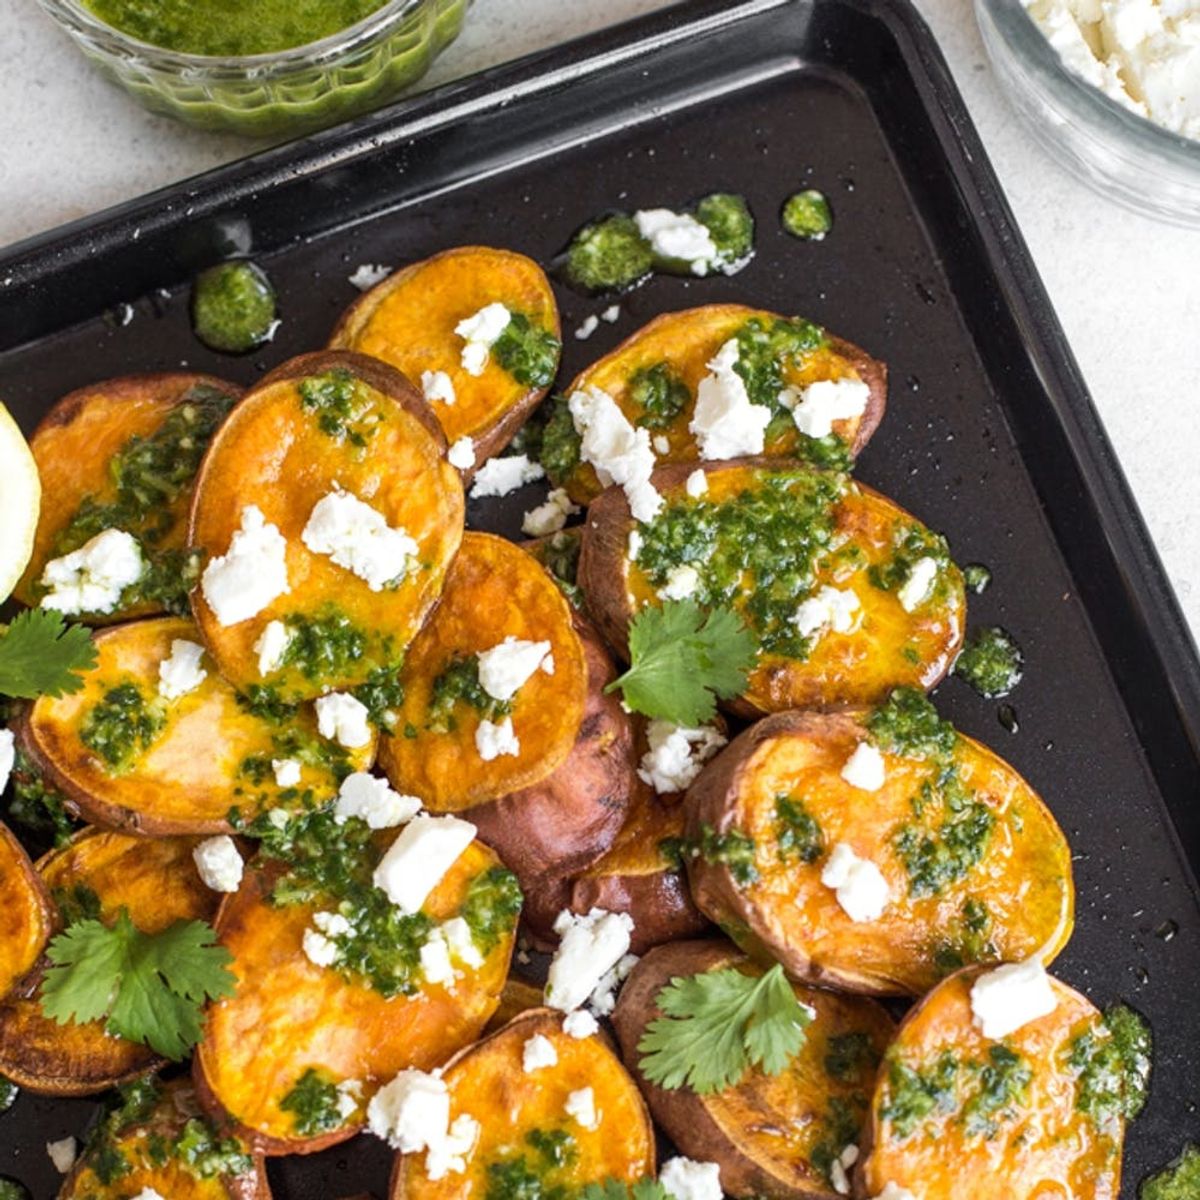 Don’t Eat Meat? Chimichurri Is Great on Sweet Potatoes Too!